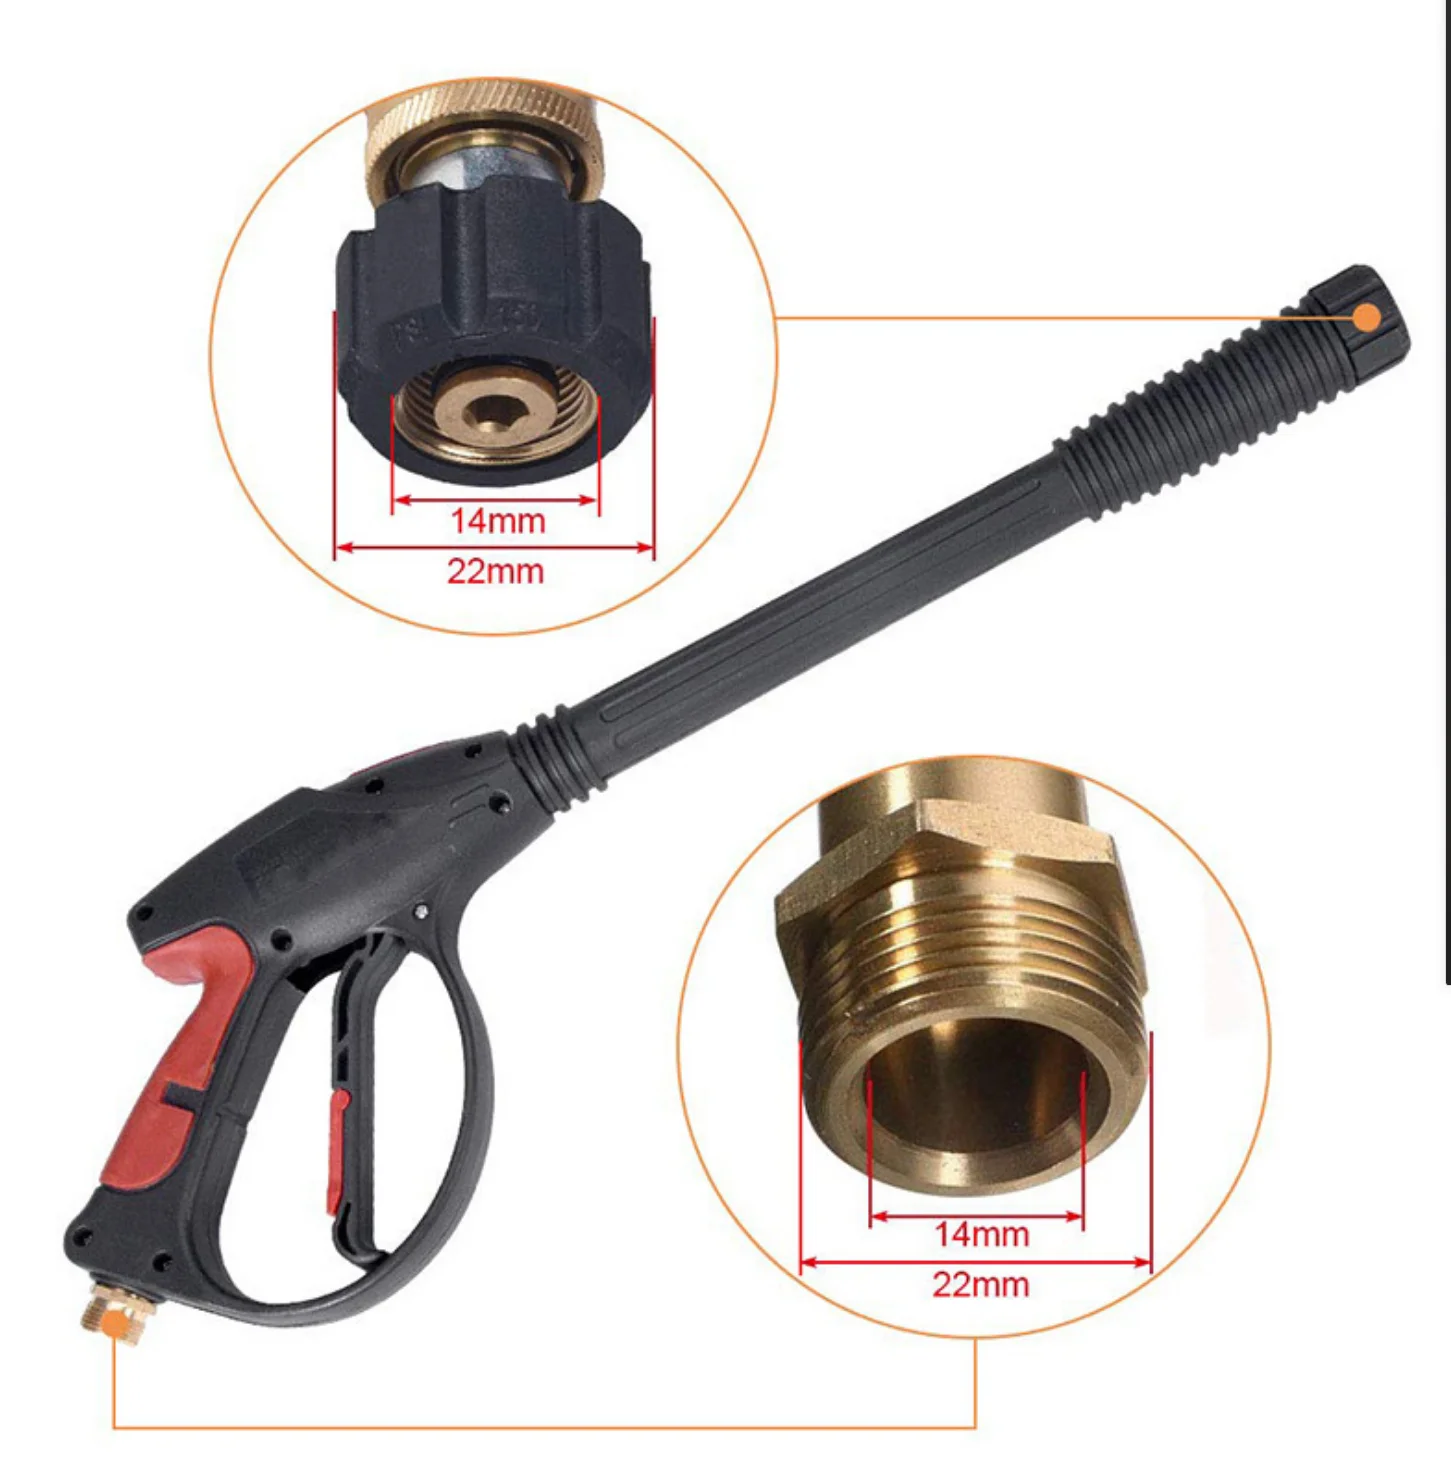 5 Nozzle M22 14mm Fitting Details about   Replacement Pressure Washer Gun with Extension Wand 